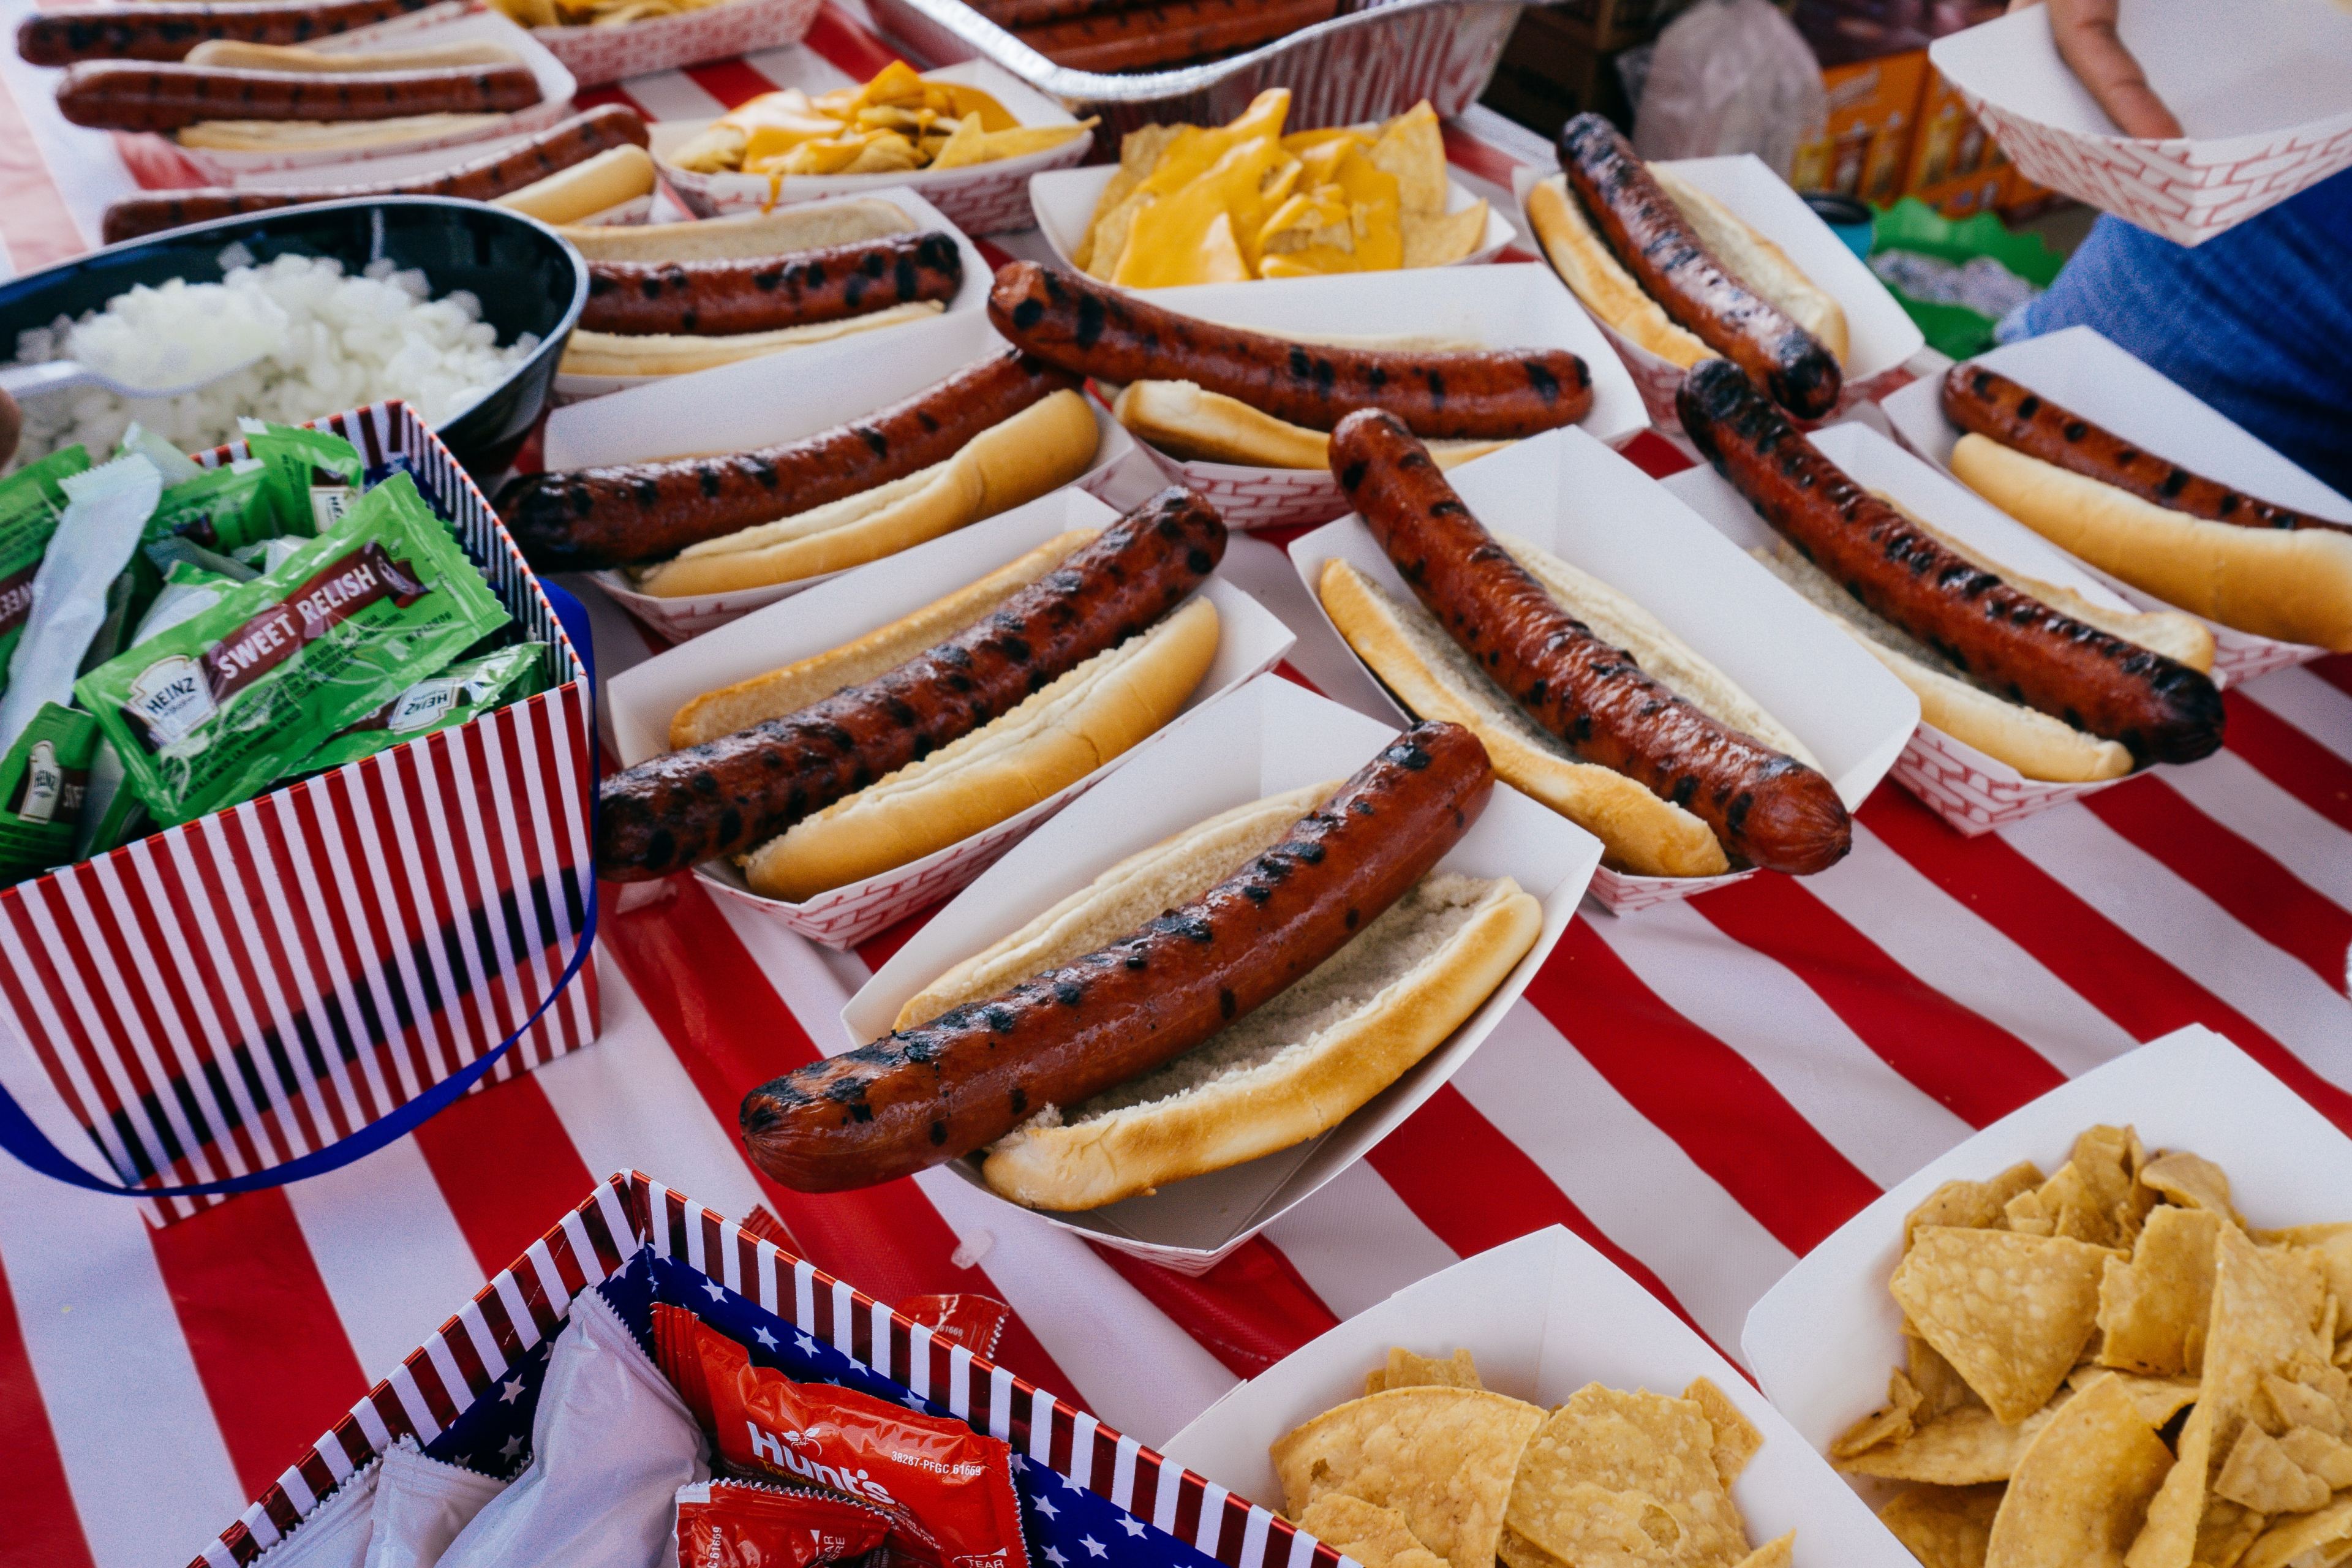 A table full of hot dogs.